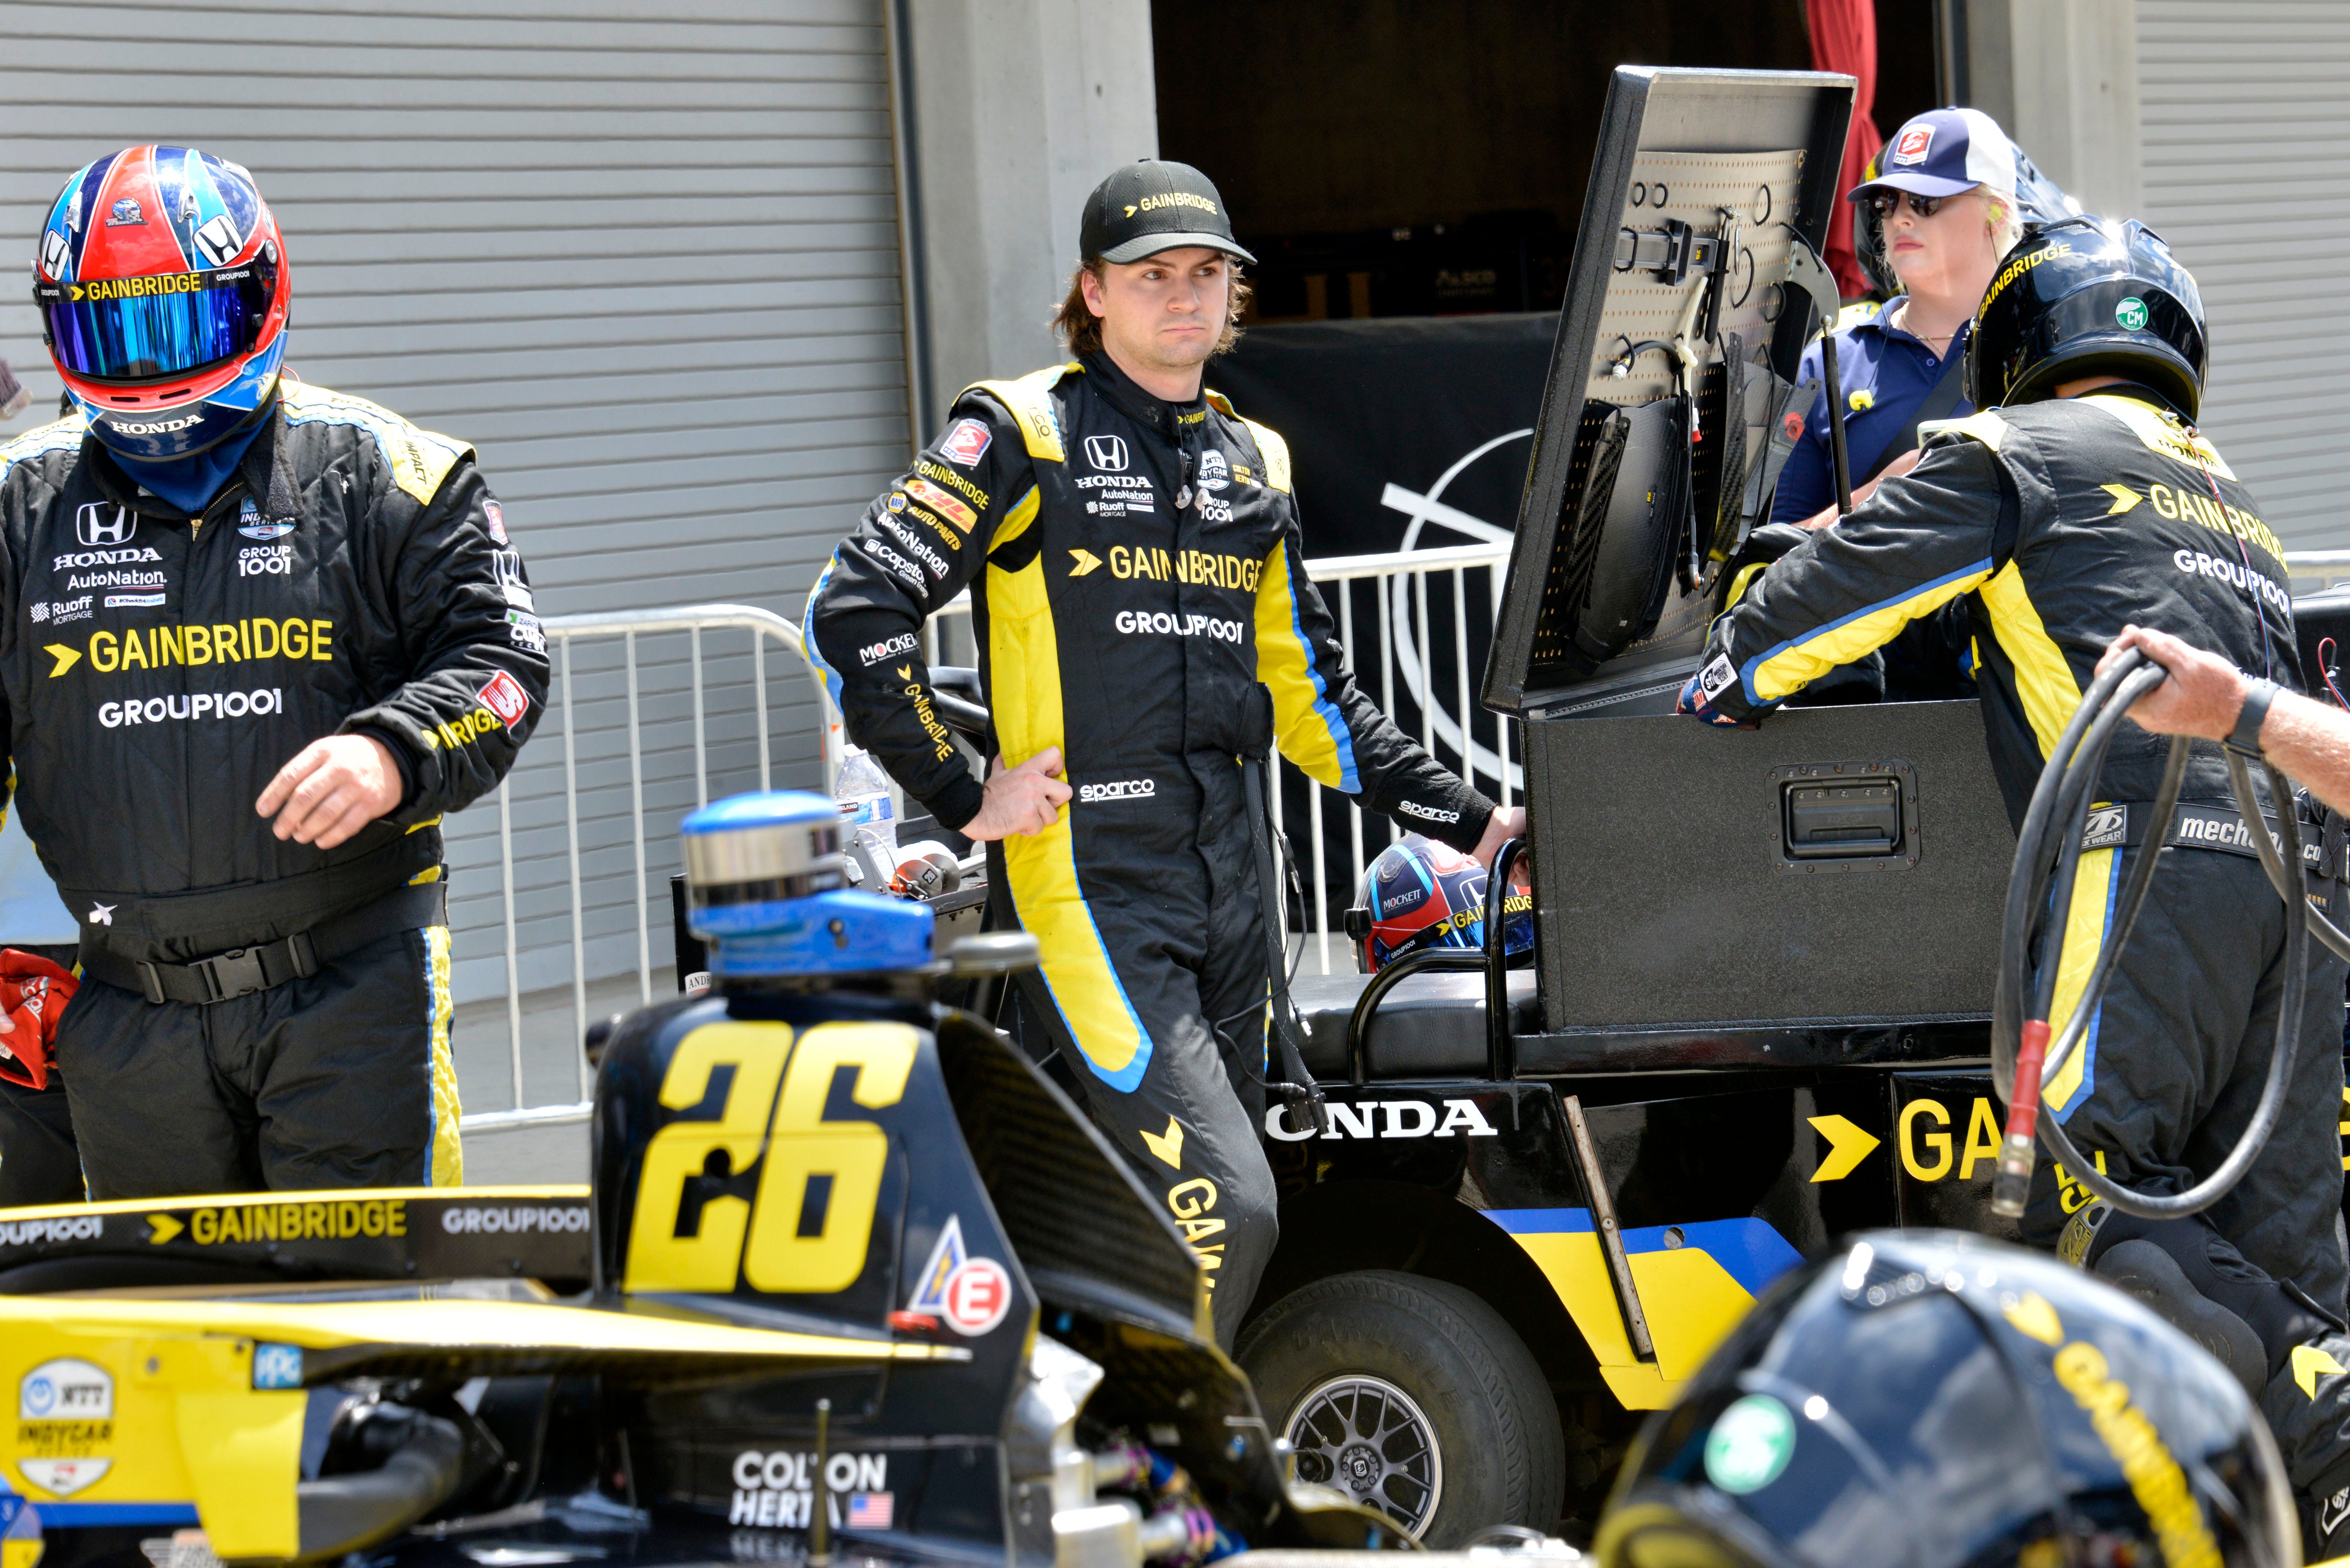 Hard Luck for Herta in Gallagher GP at Indy